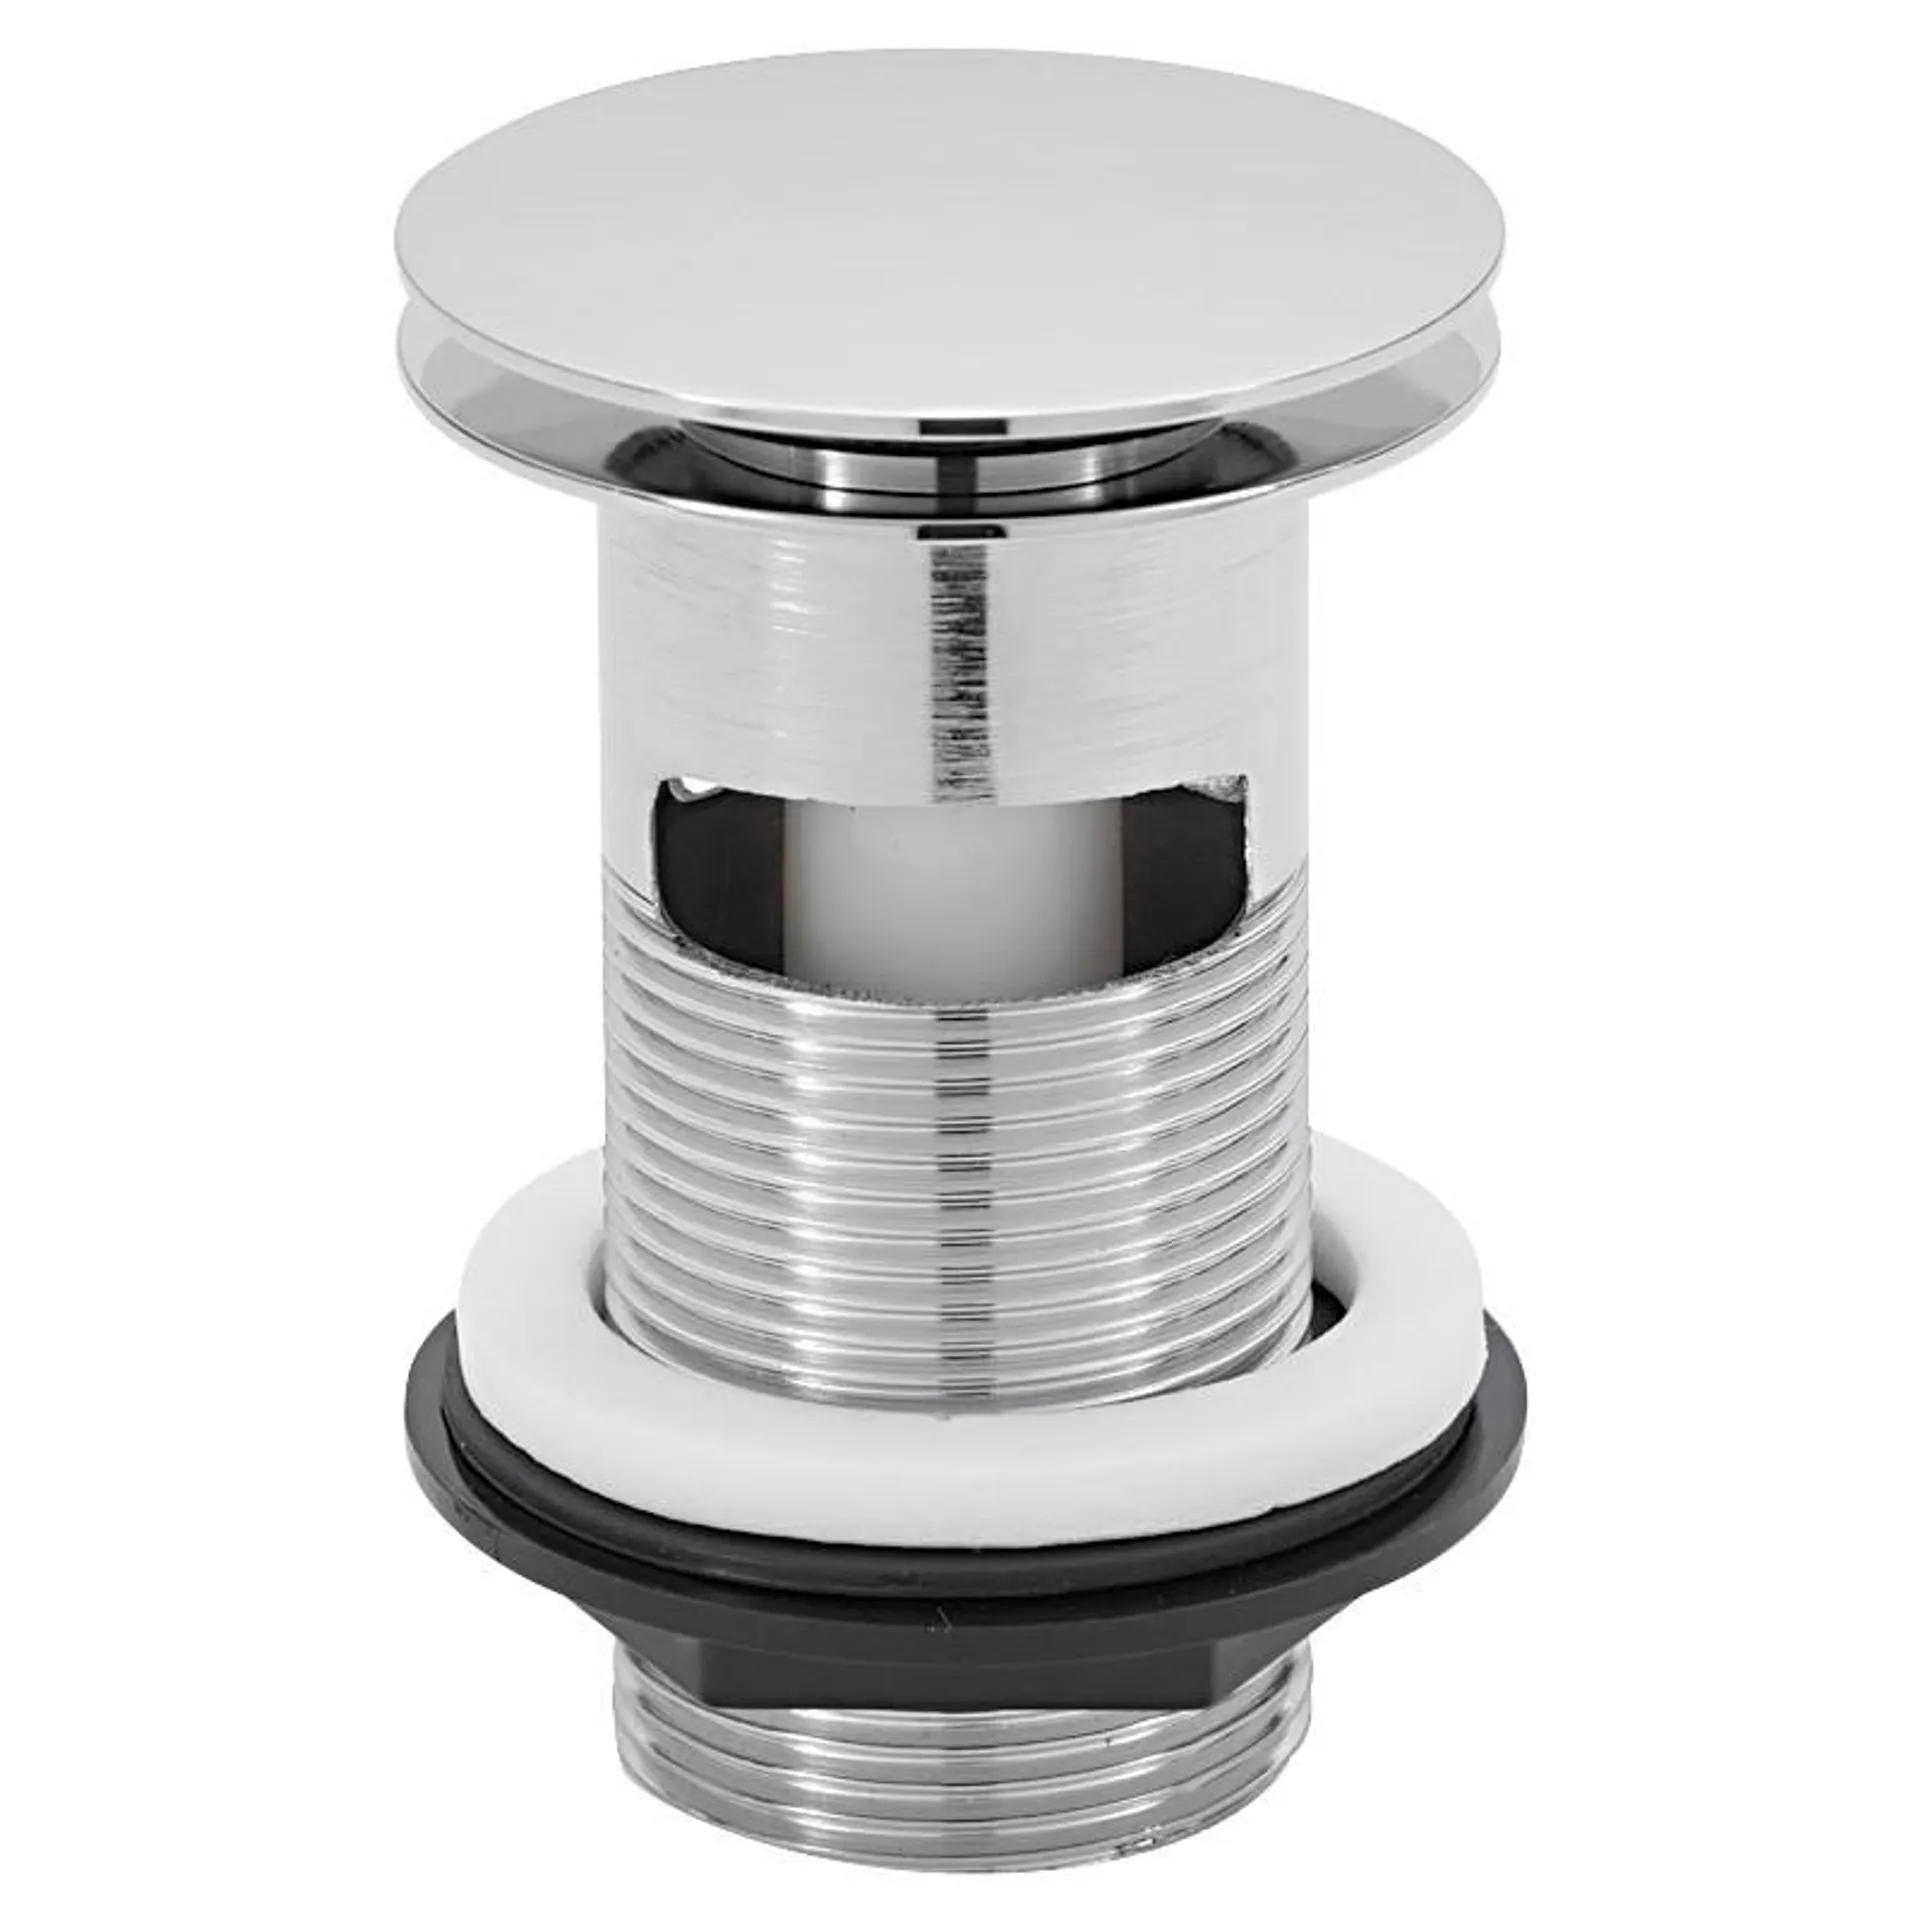 Click-clac 1 1/4" Chrome Plated Stainless Steel Basin Plug Slotted